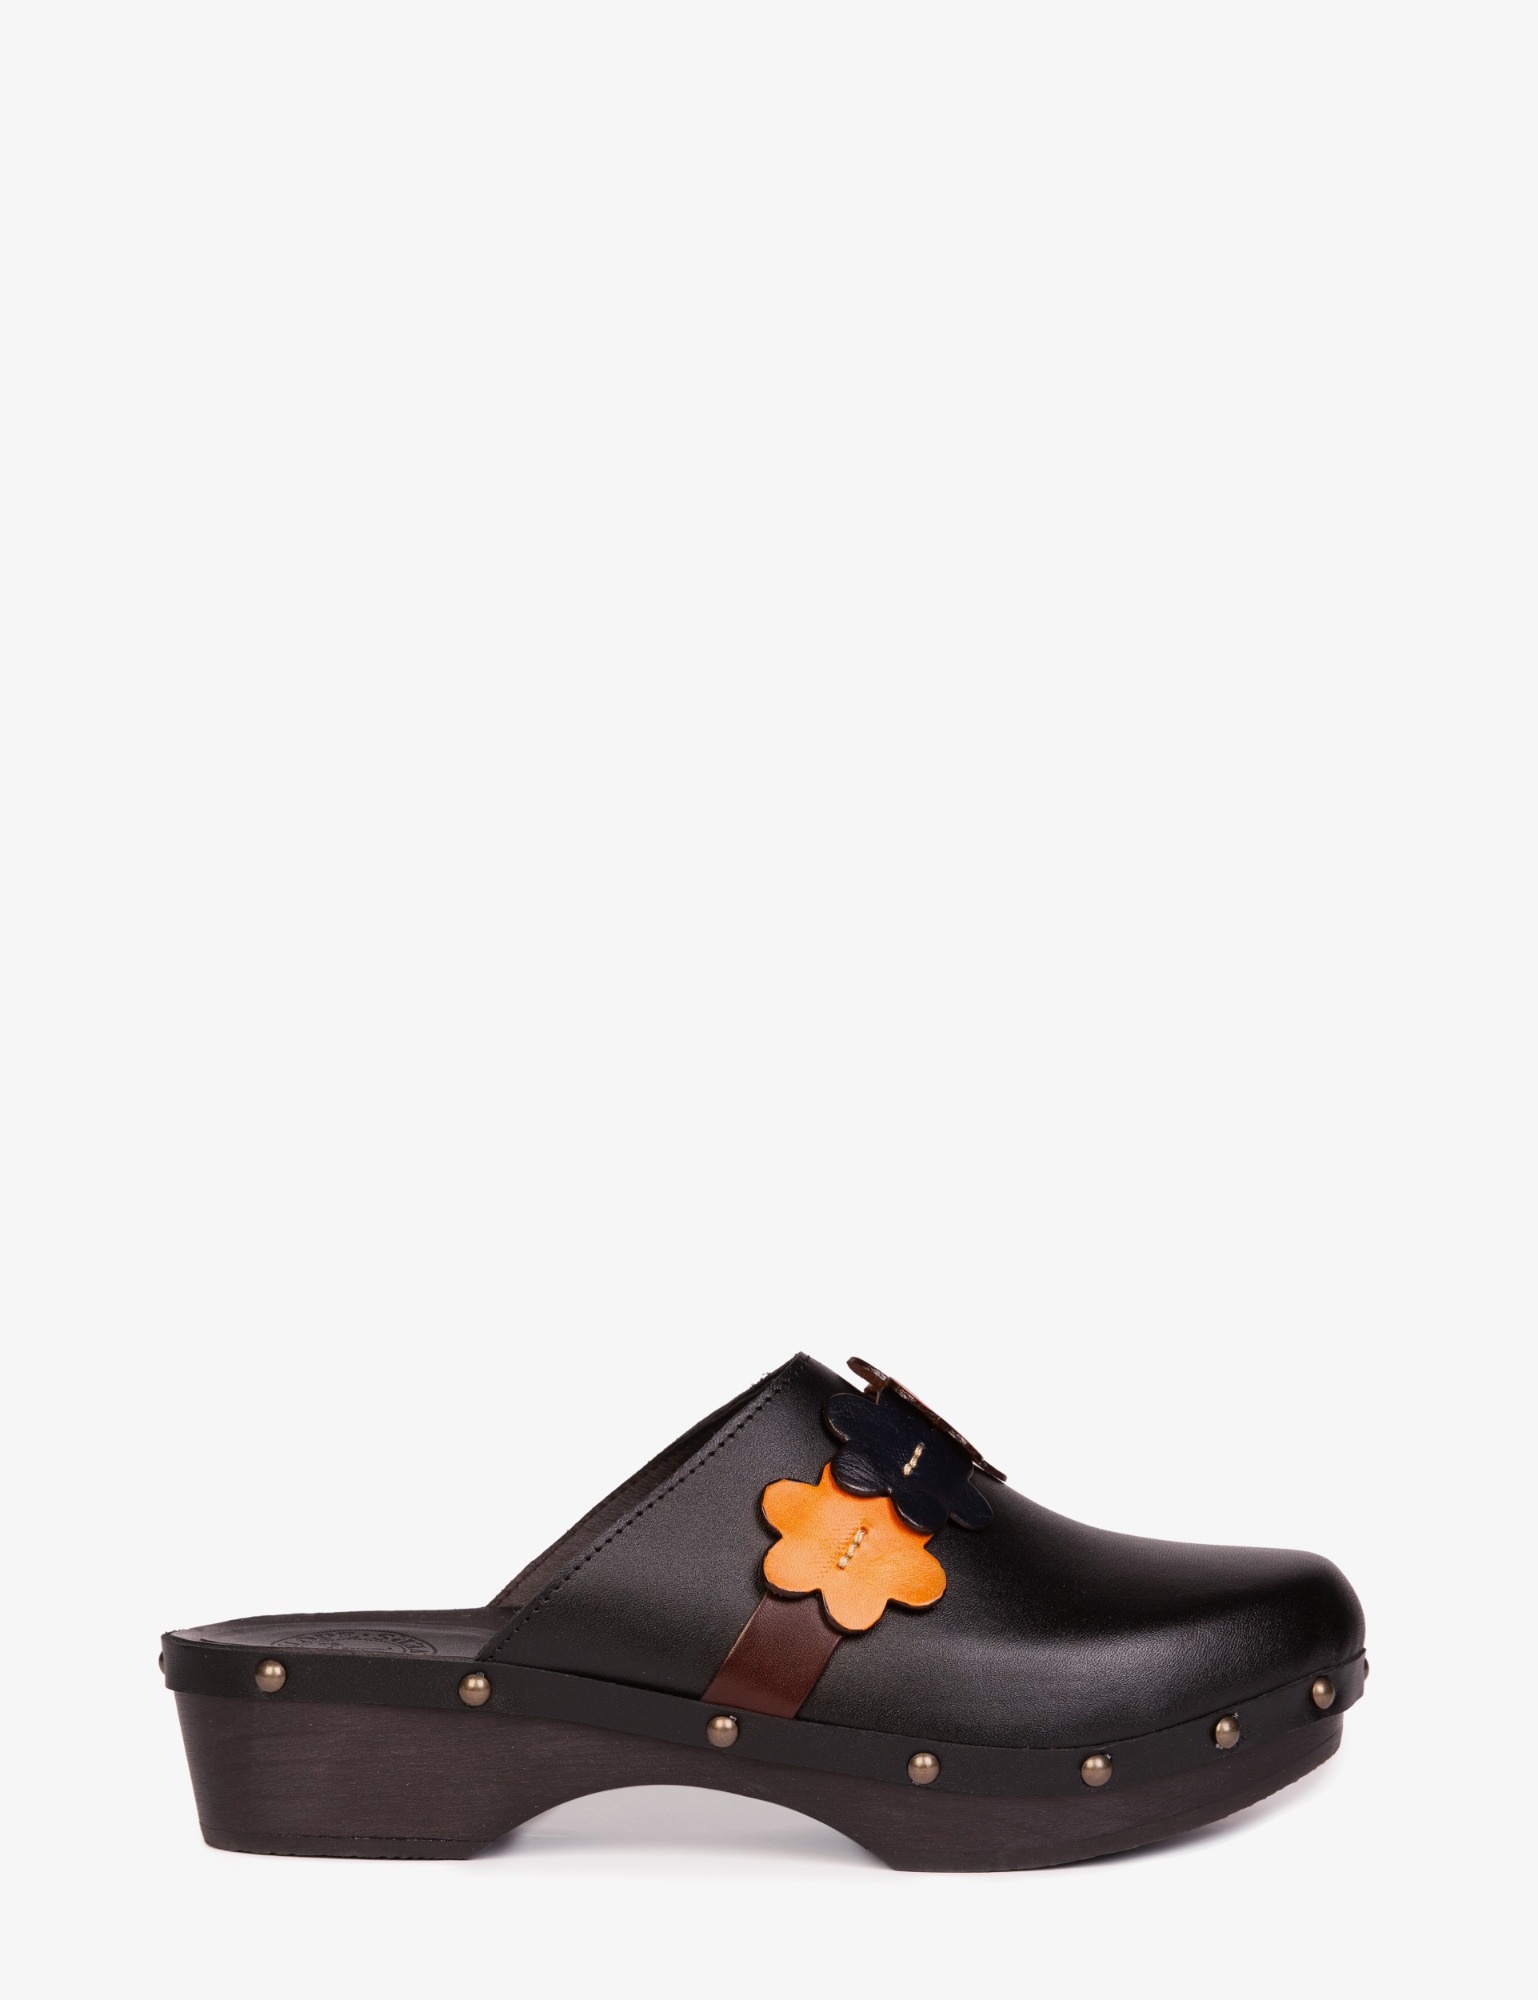 Low Floral Garland Leather Clog